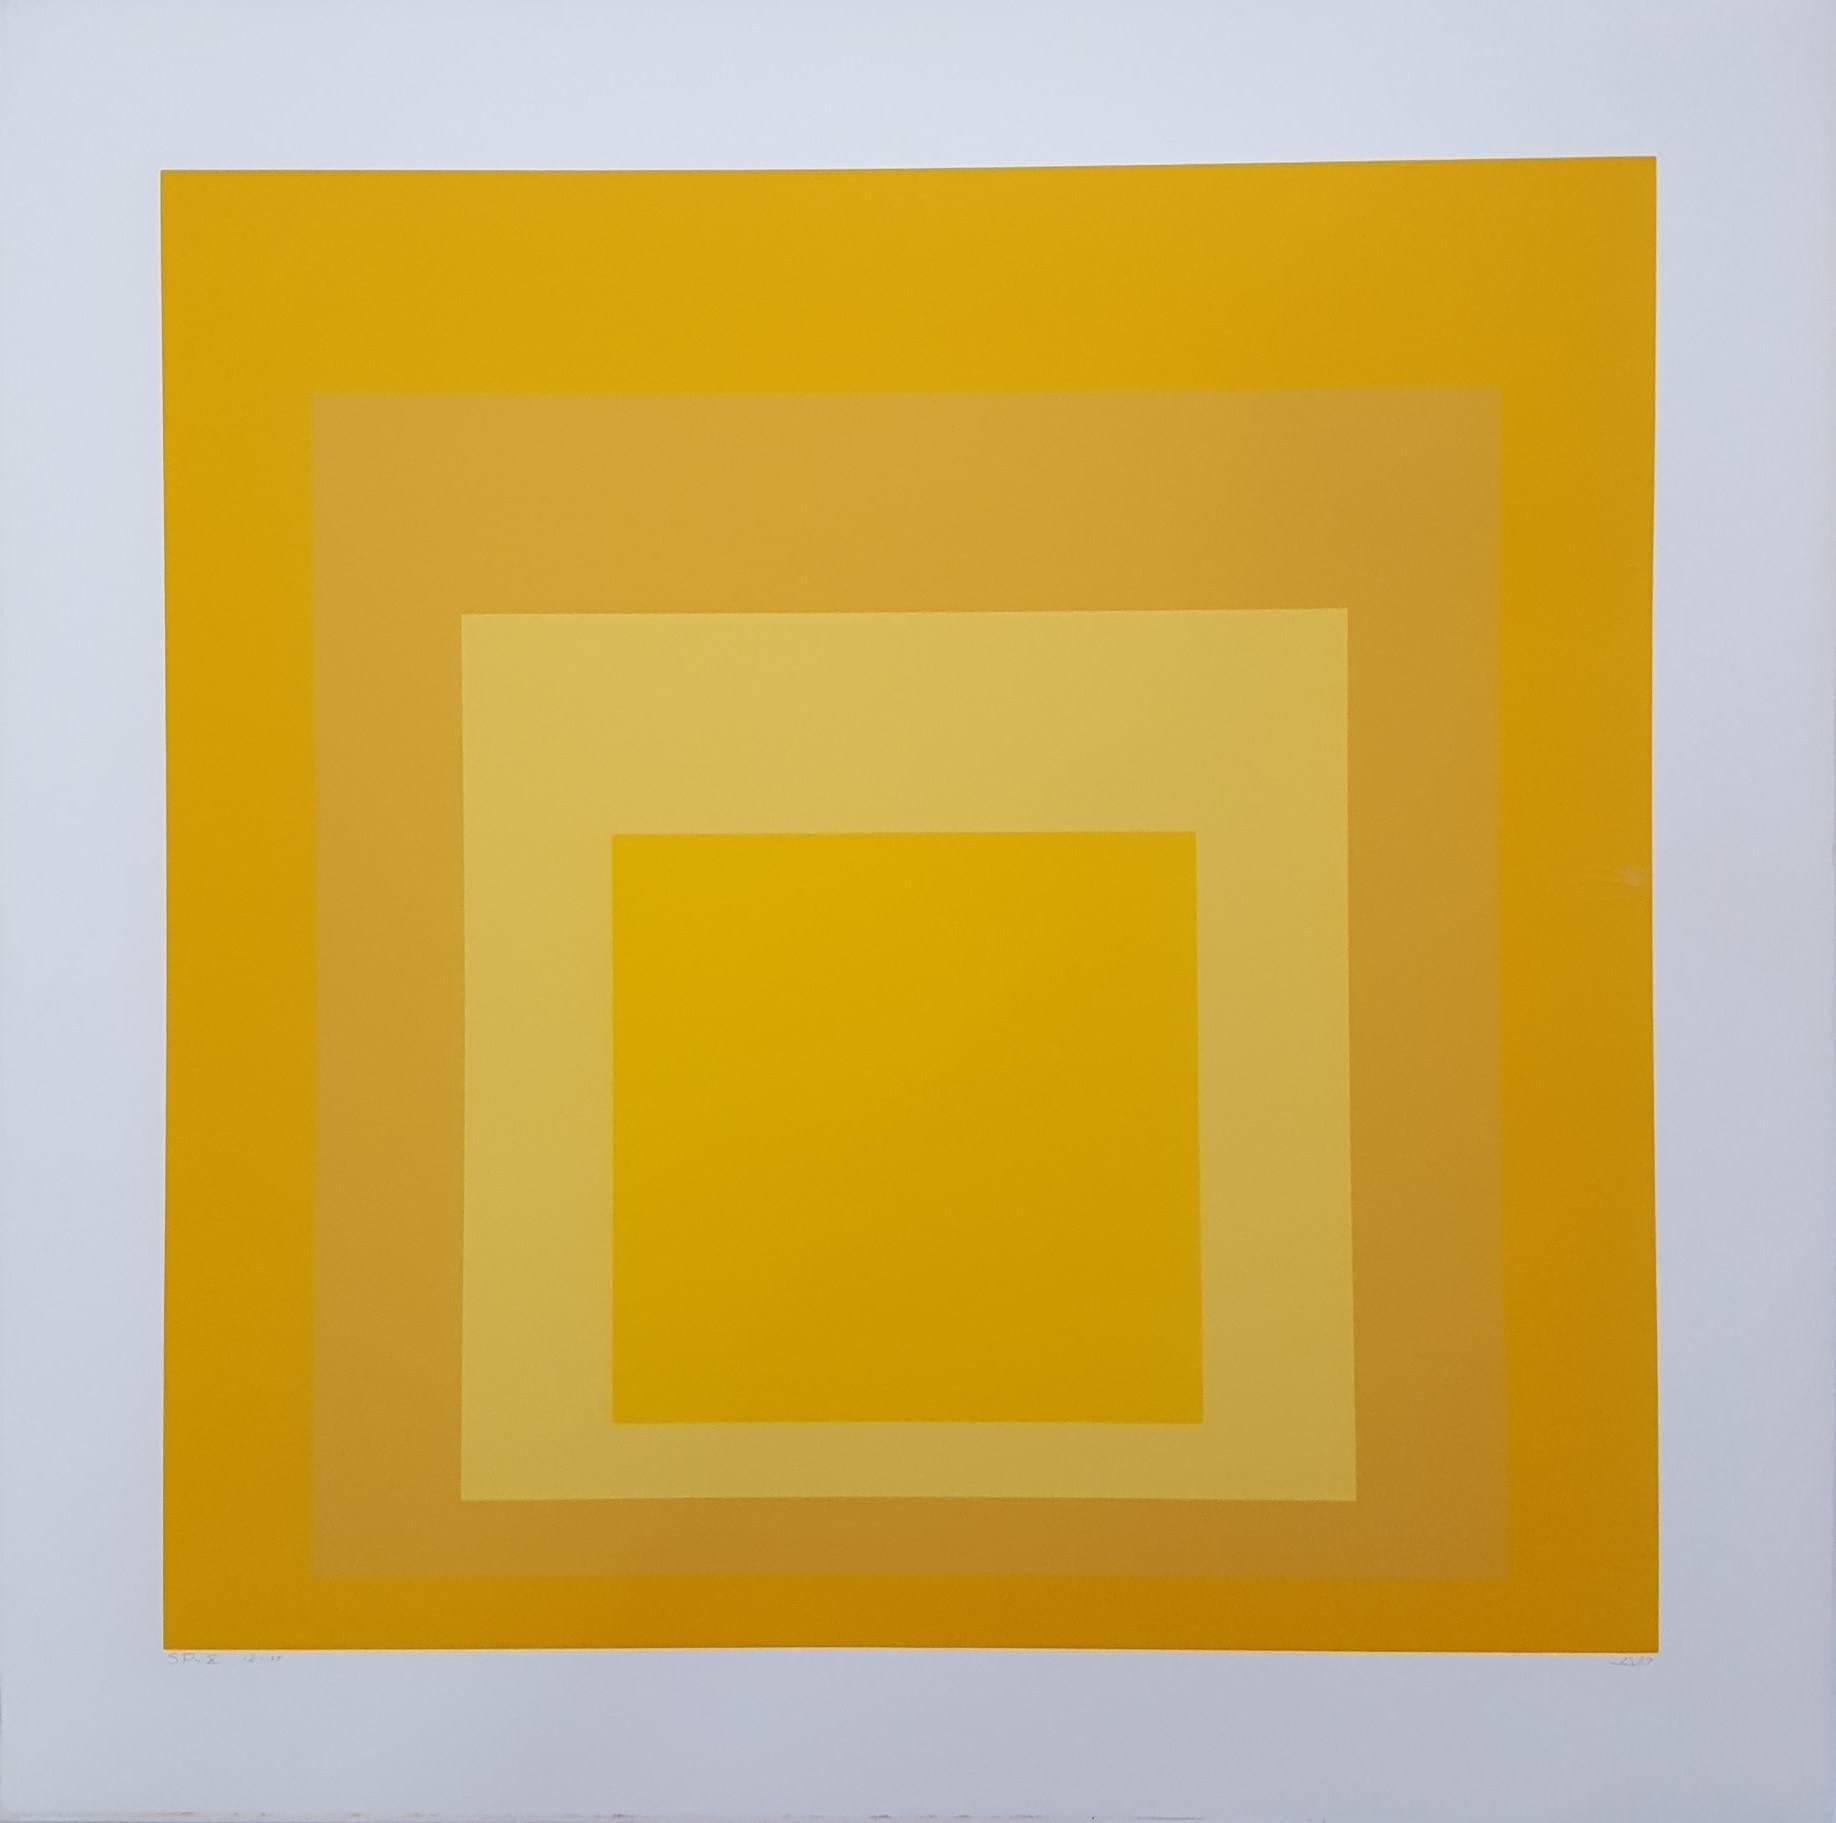 SP X - Orange Abstract Print by Josef Albers